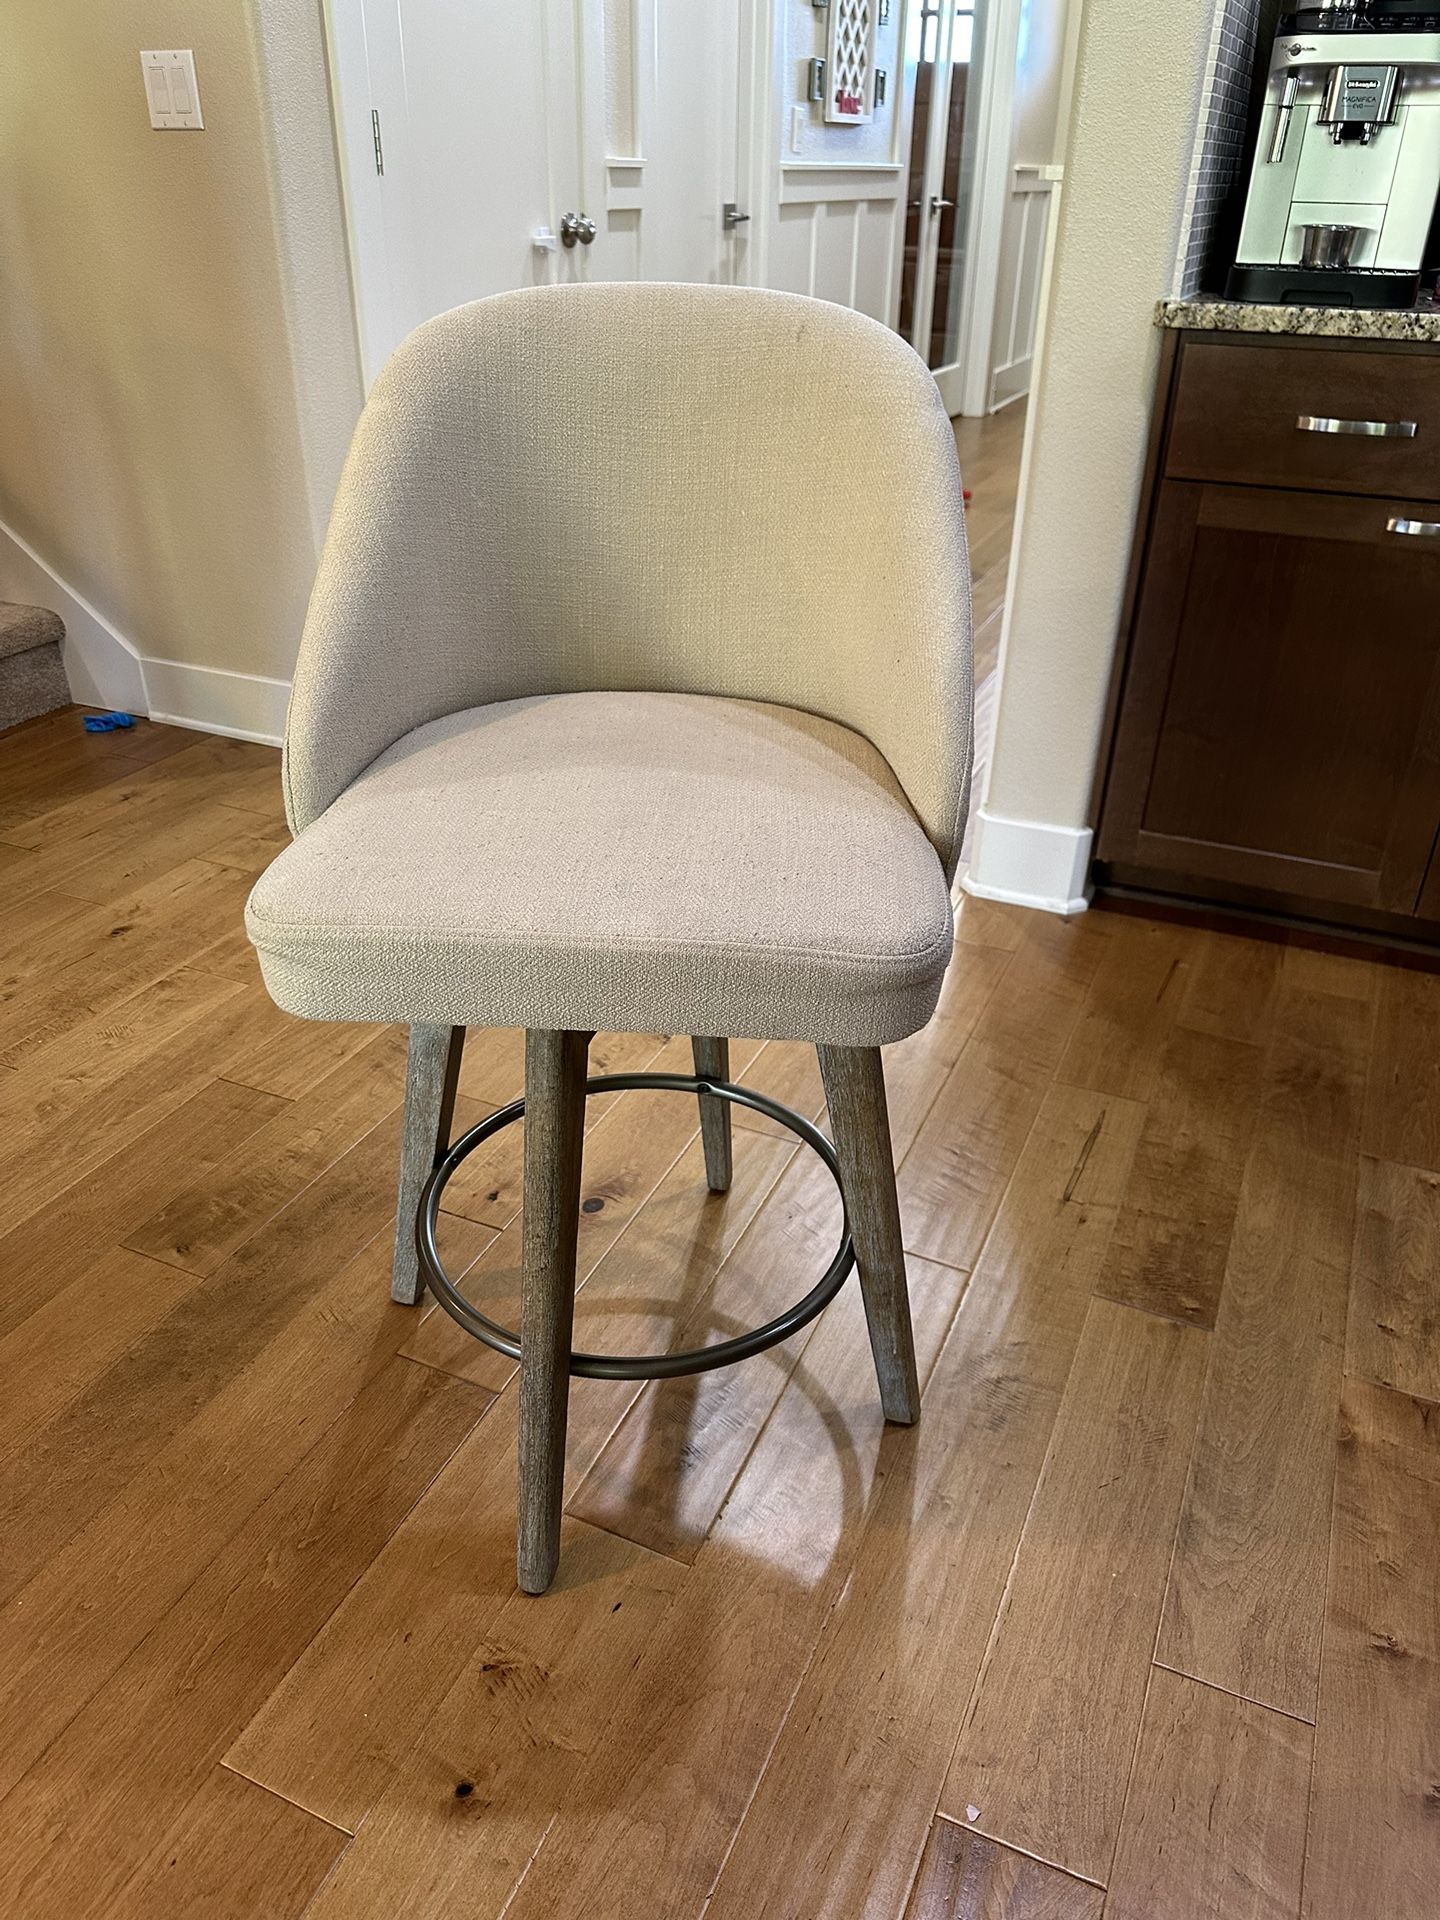 Used Counter Height Stools For Sale